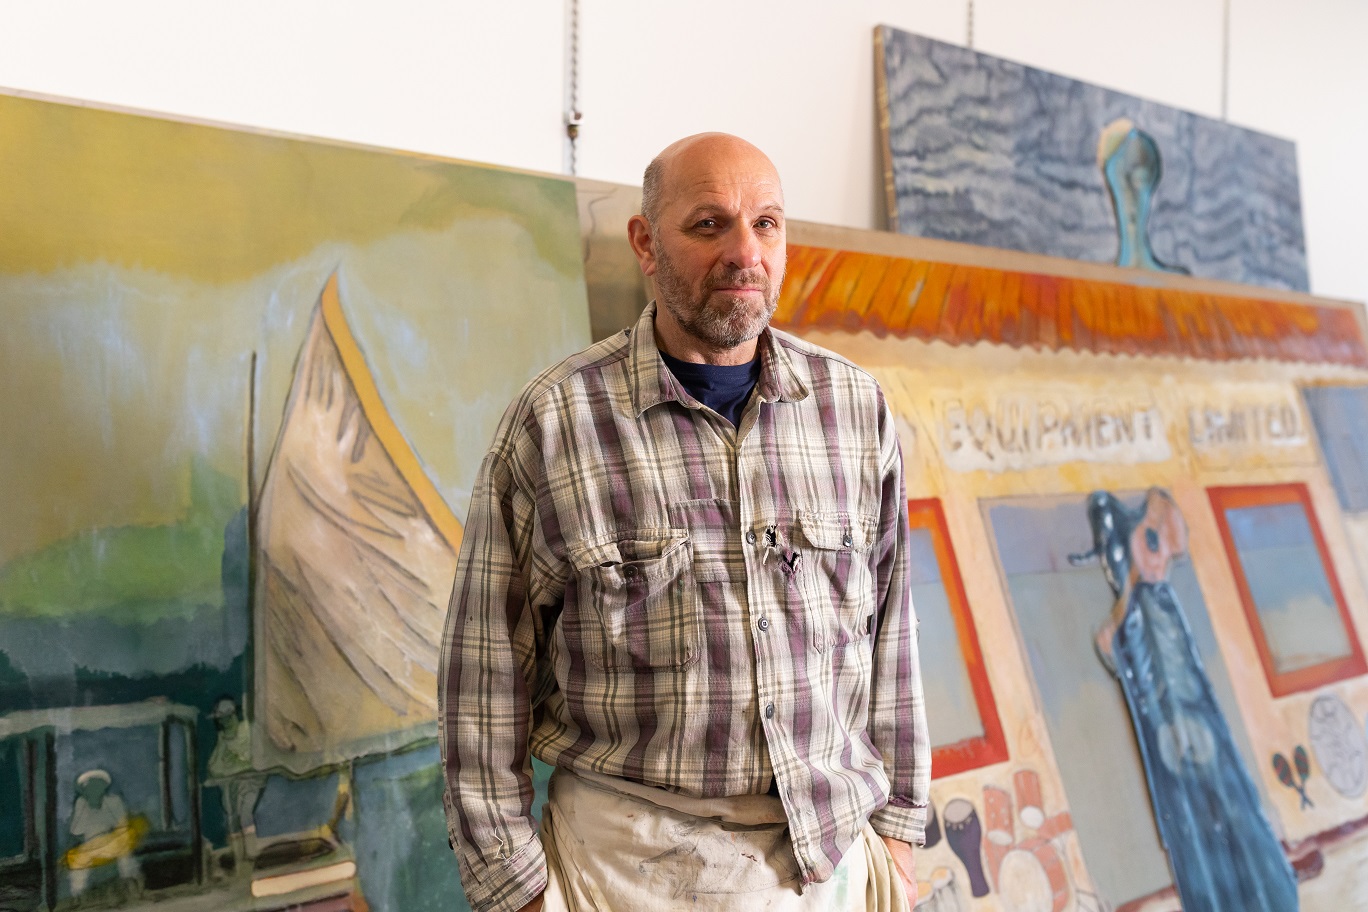 Major exhibition of new and recent works by Peter Doig to open at The